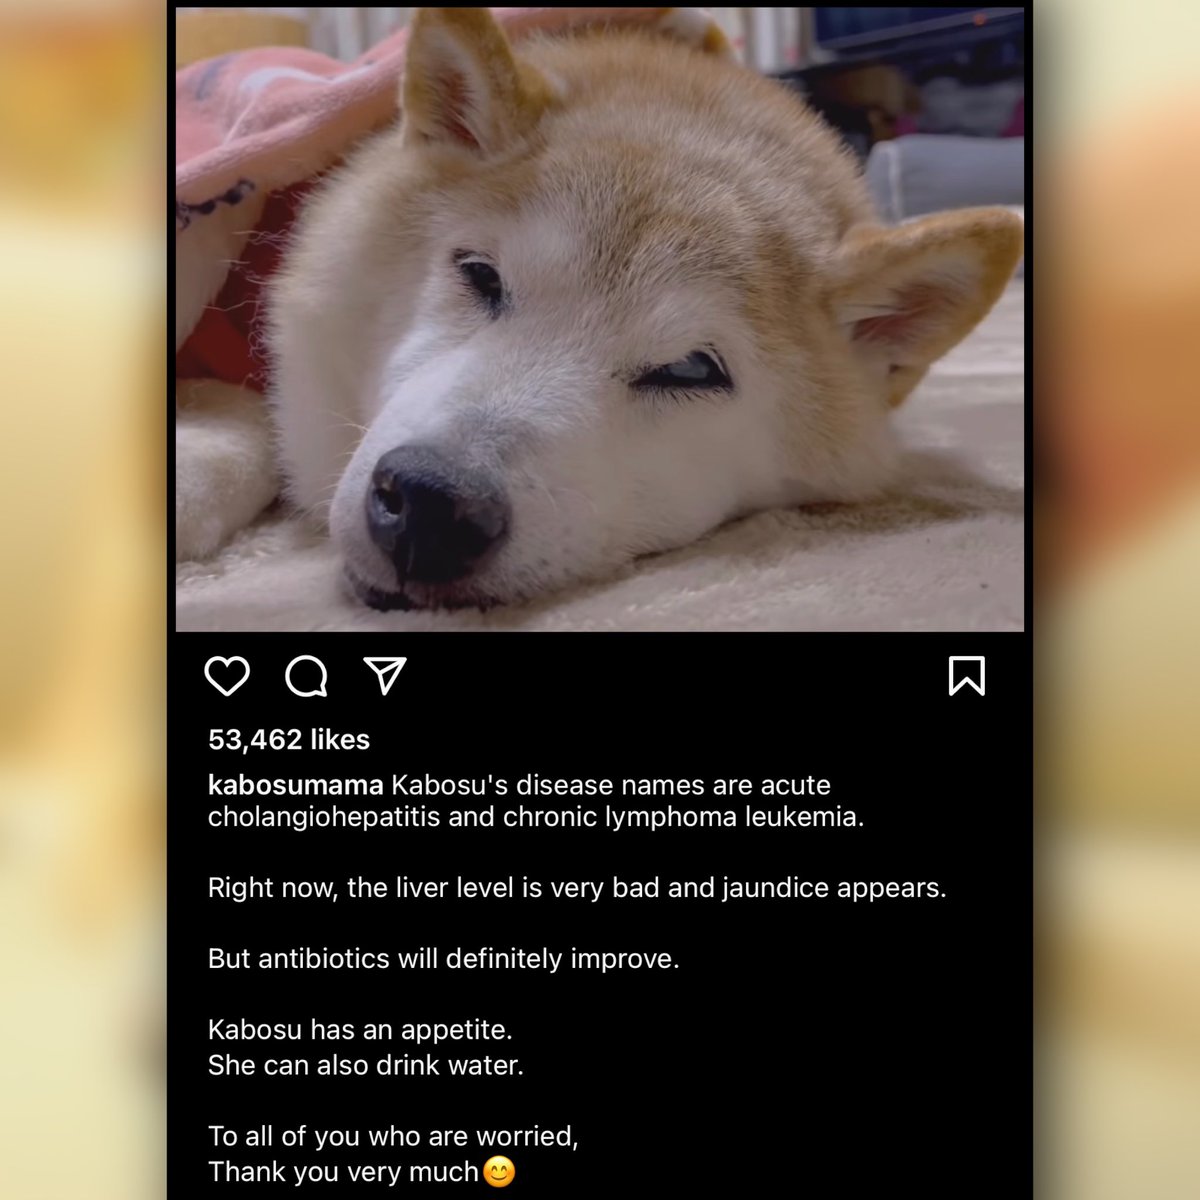 Kabosu, the famous Shiba Inu behind the 'doge' memes, is seriously ill with cancer, her owner reported